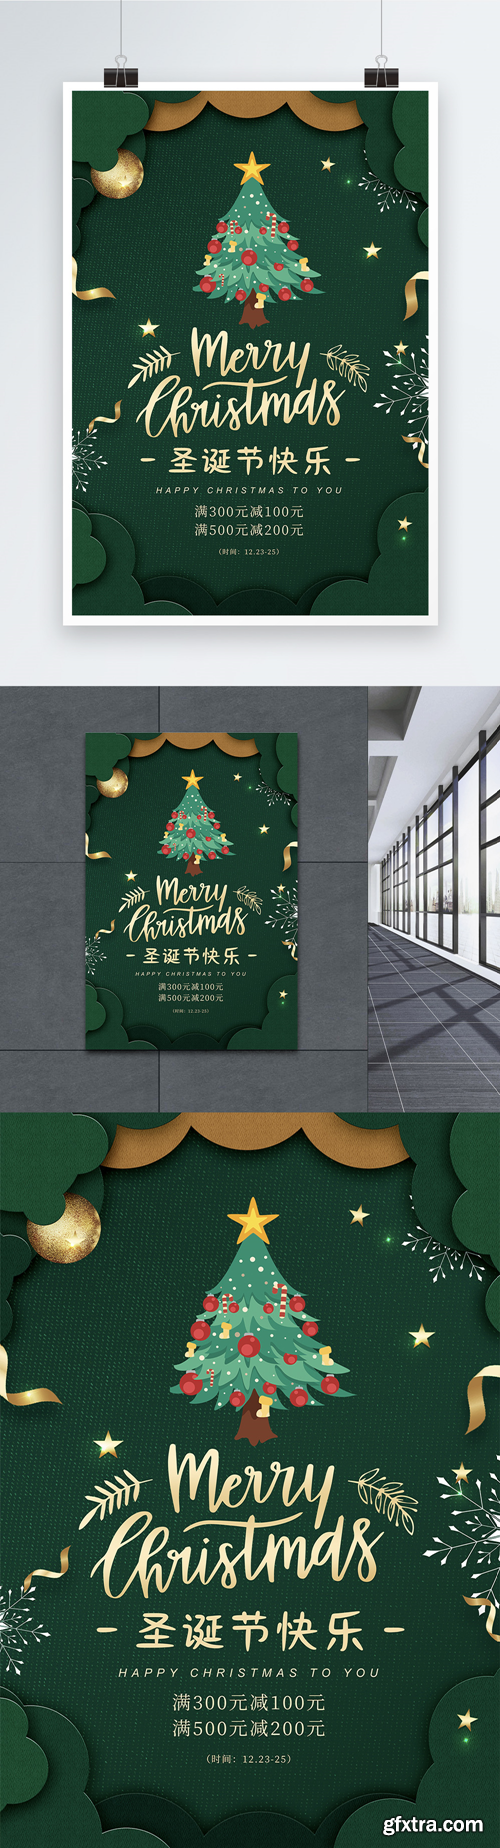 green paper cut wind christmas promotion poster